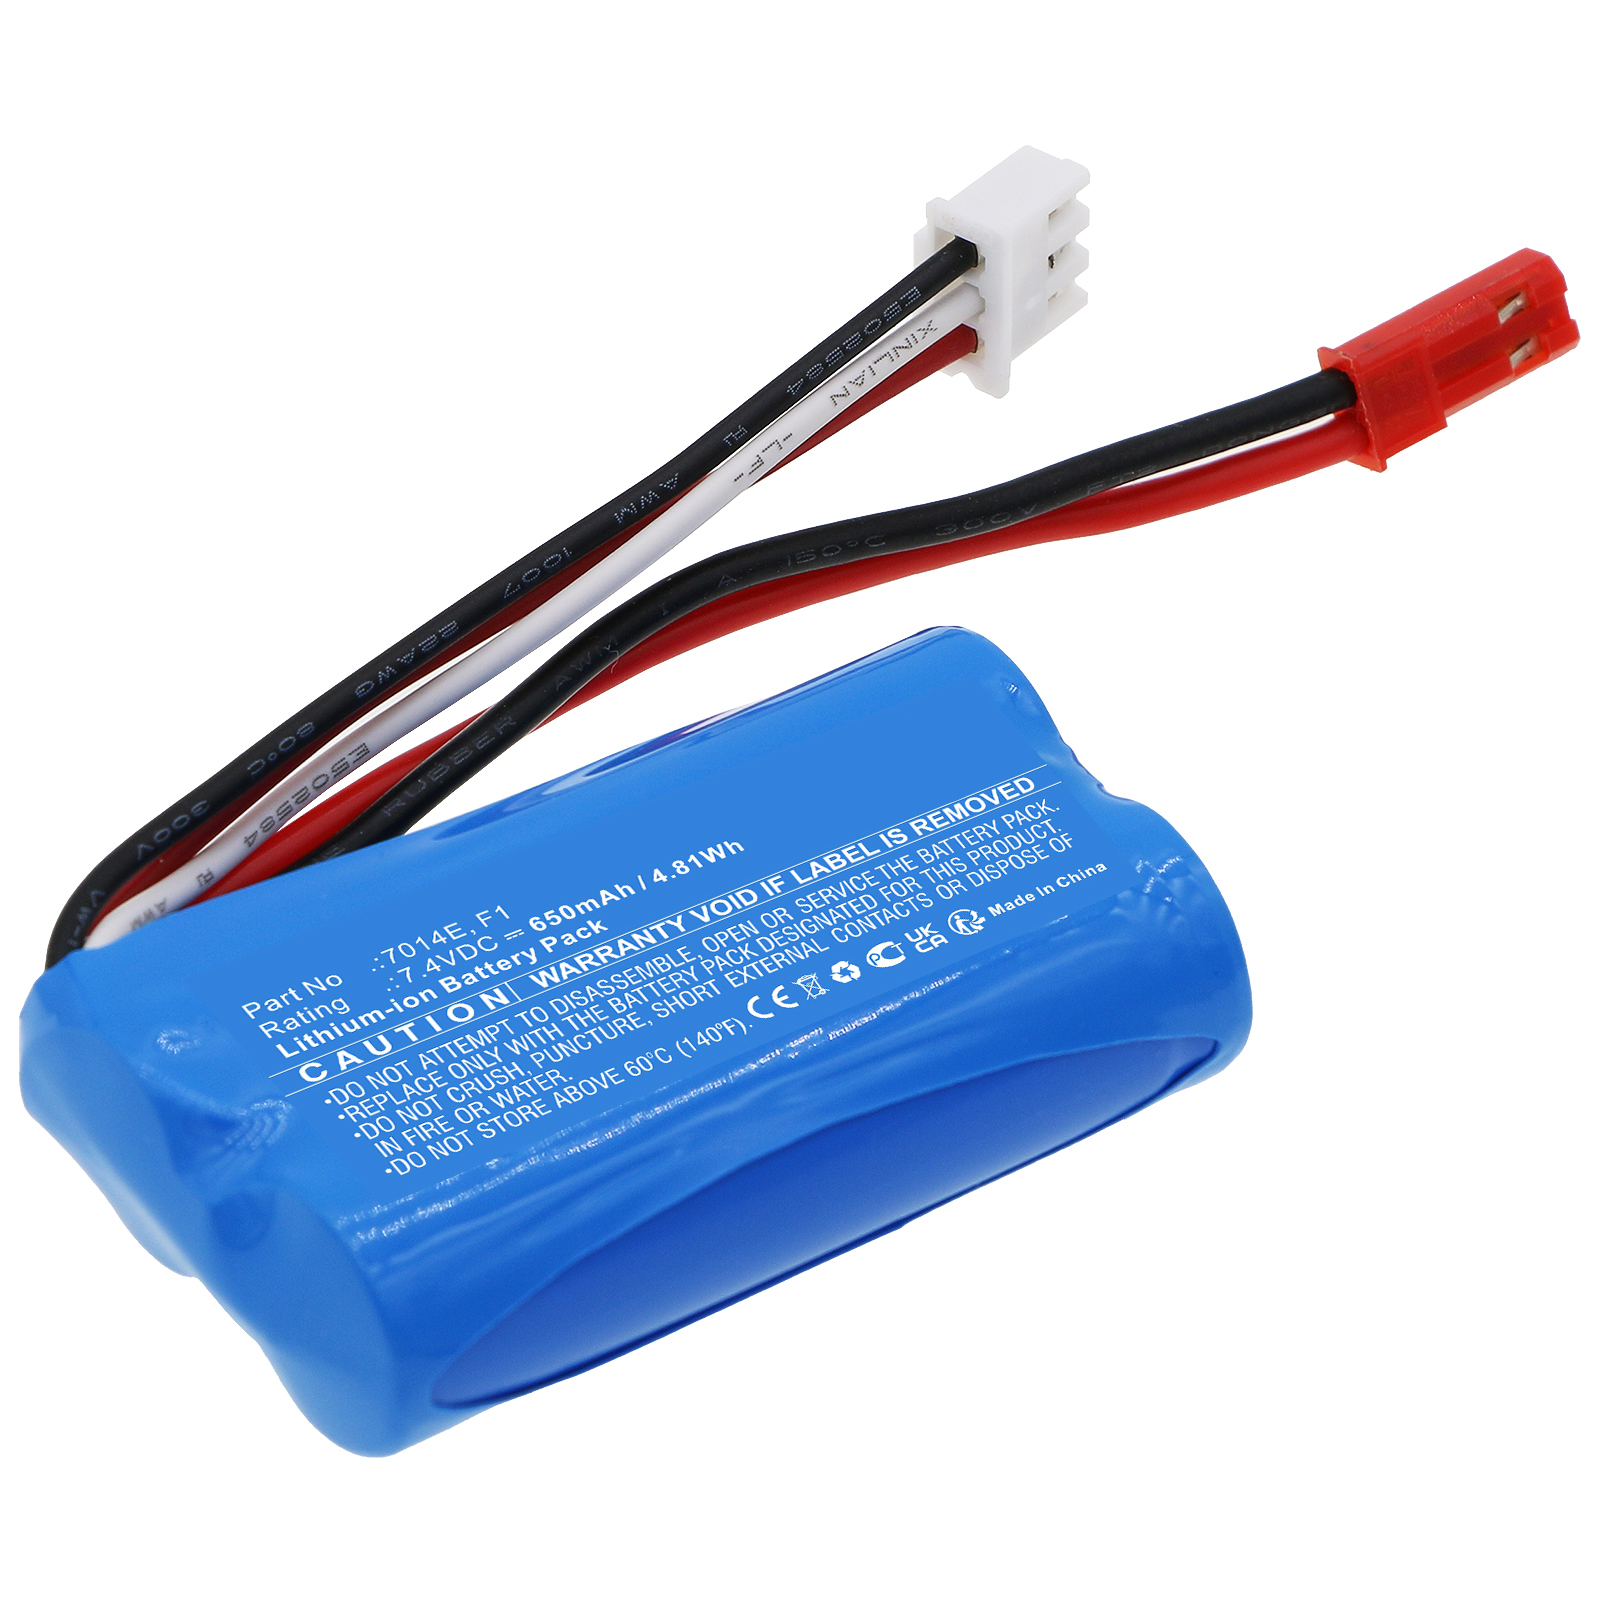 Synergy Digital Helicopter Battery, Compatible with Shuang Ma 7014E Helicopters Battery (Li-ion, 7.4V, 650mAh)